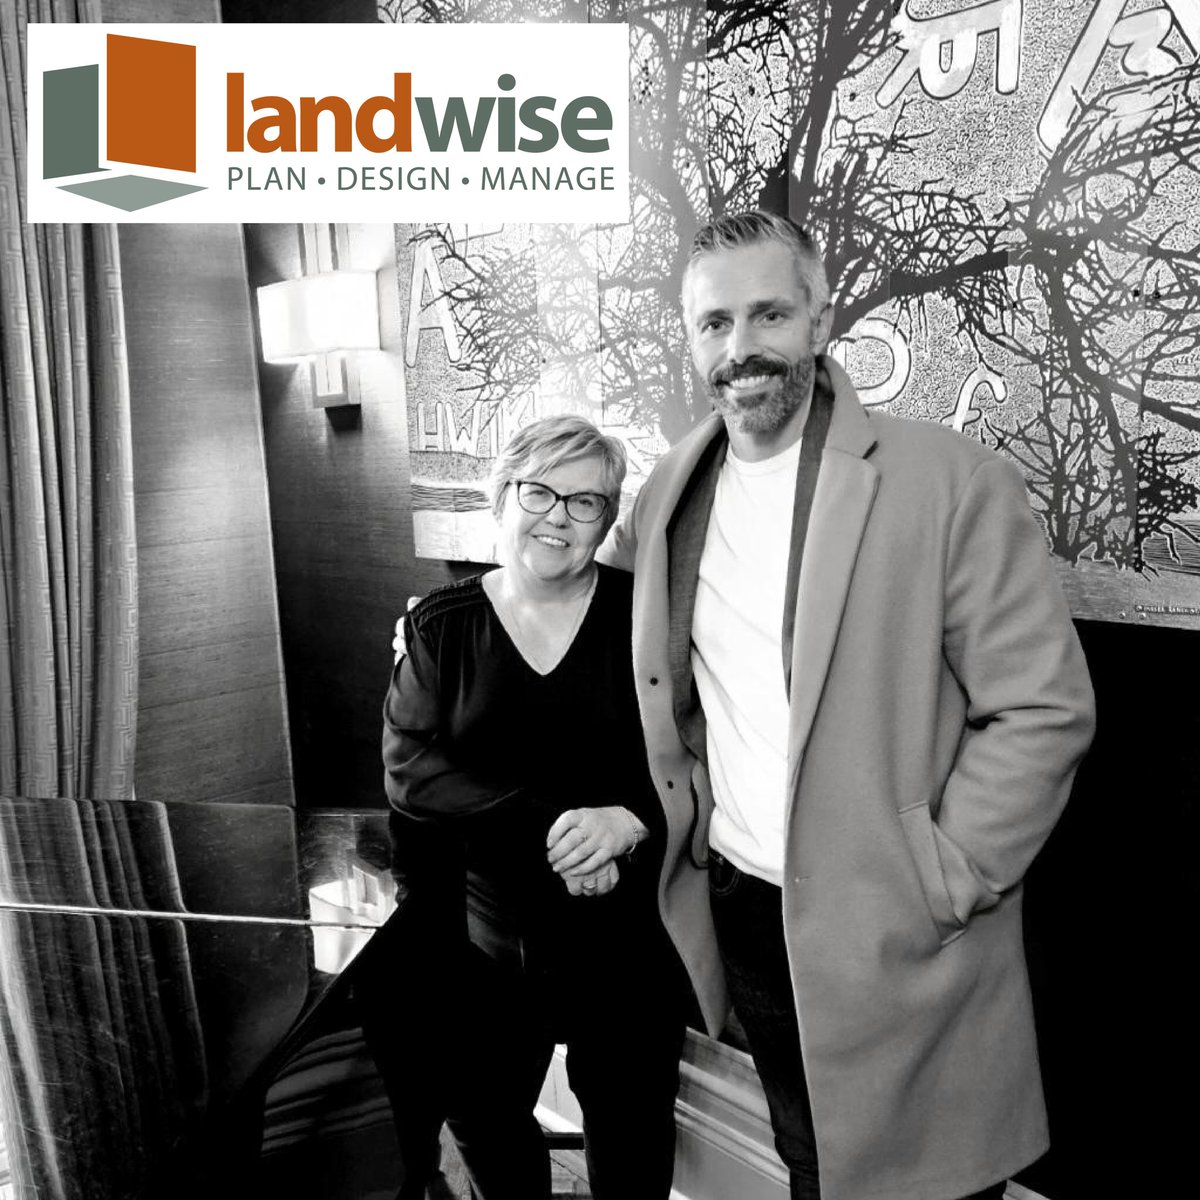 We rebranded TJohnsConsulting as LANDWISE just 2️⃣ wks ago & & committed to:
✔️Plan Smart,
✔️Design Smart, and
✔️Manage Smart.

TY to Greening Media for their expertise & patience on our journey 🎢

Terri & Edward
#ThrowbackThursday
#landwise #plansmart #designsmart #managesmart